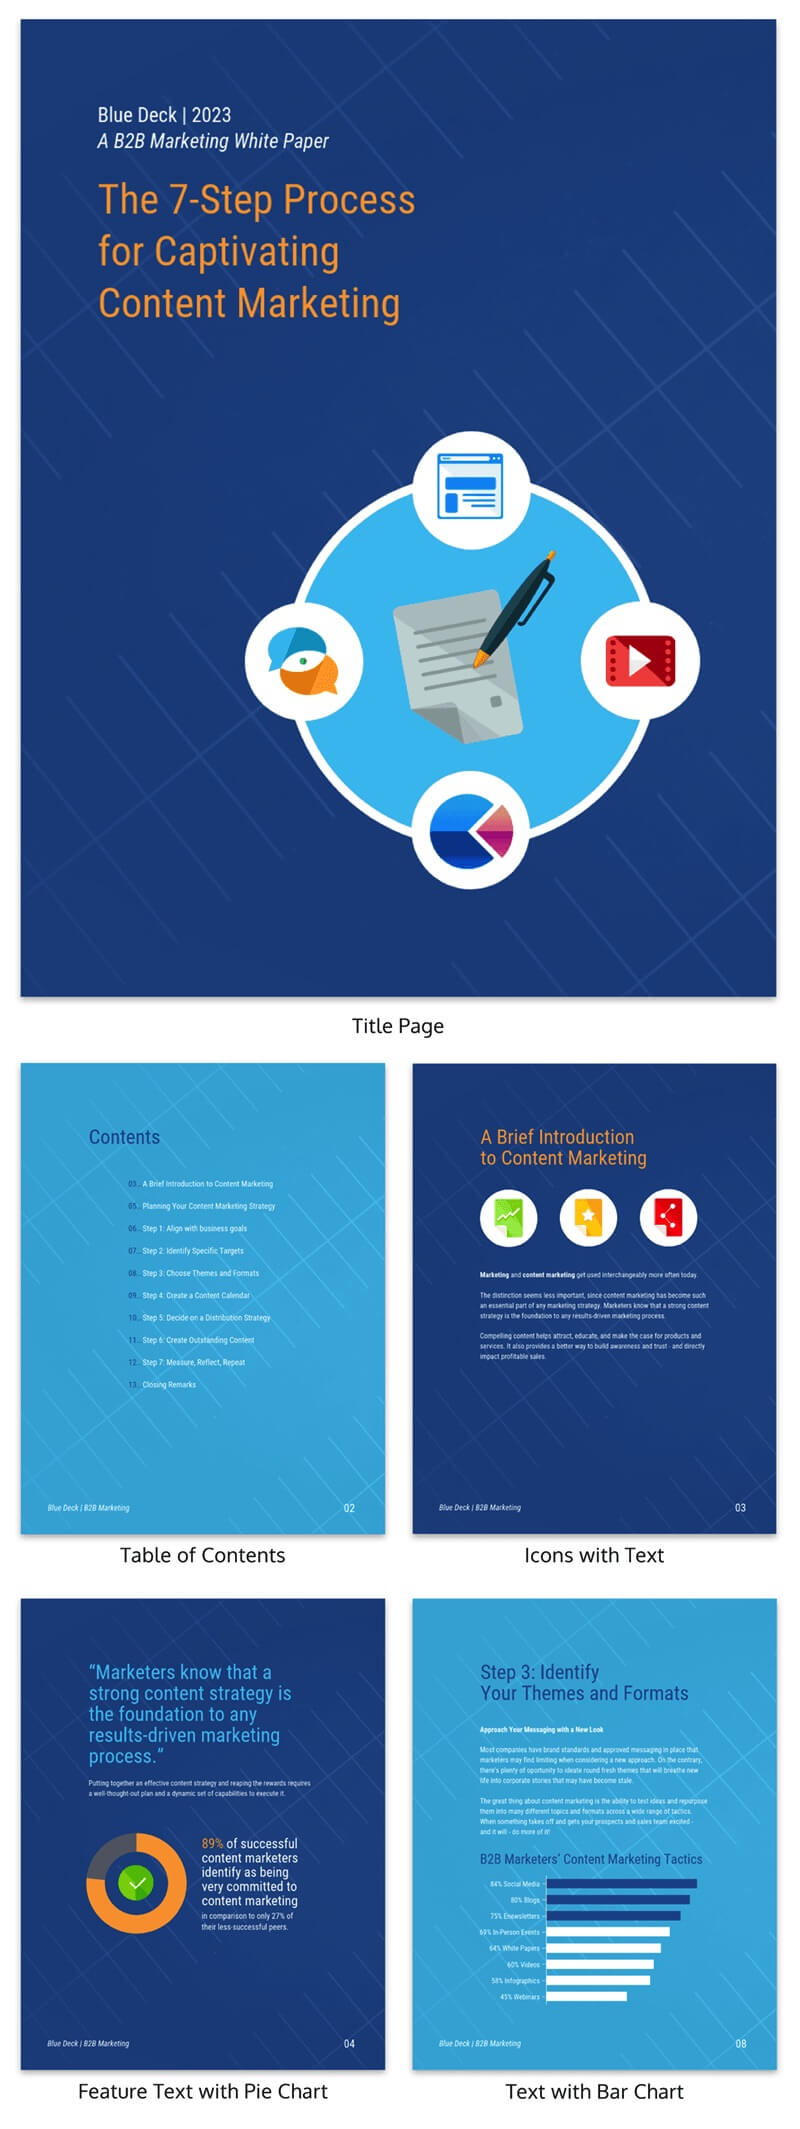 30+ Business Report Templates Every Business Needs – Venngage With Regard To White Paper Report Template